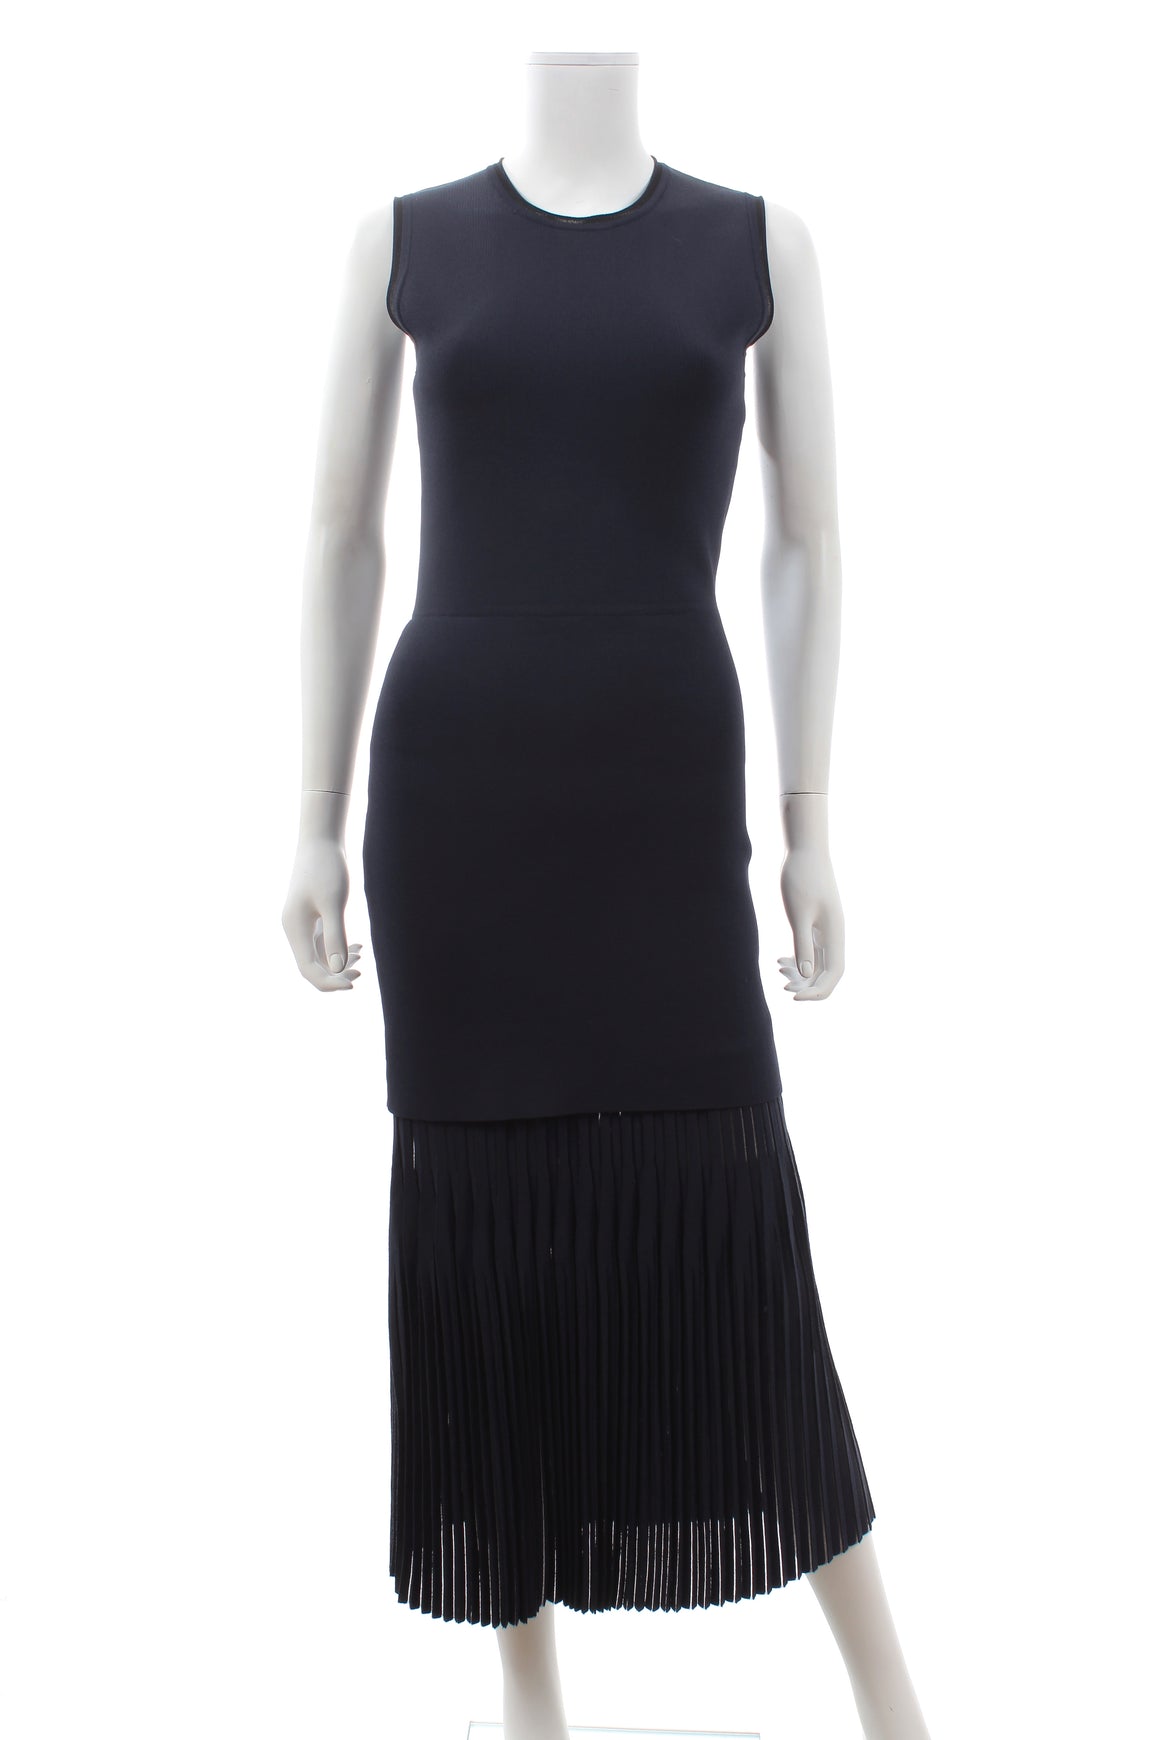 Dion Lee Pleated Bonded Stretch-Crepe Midi Dress